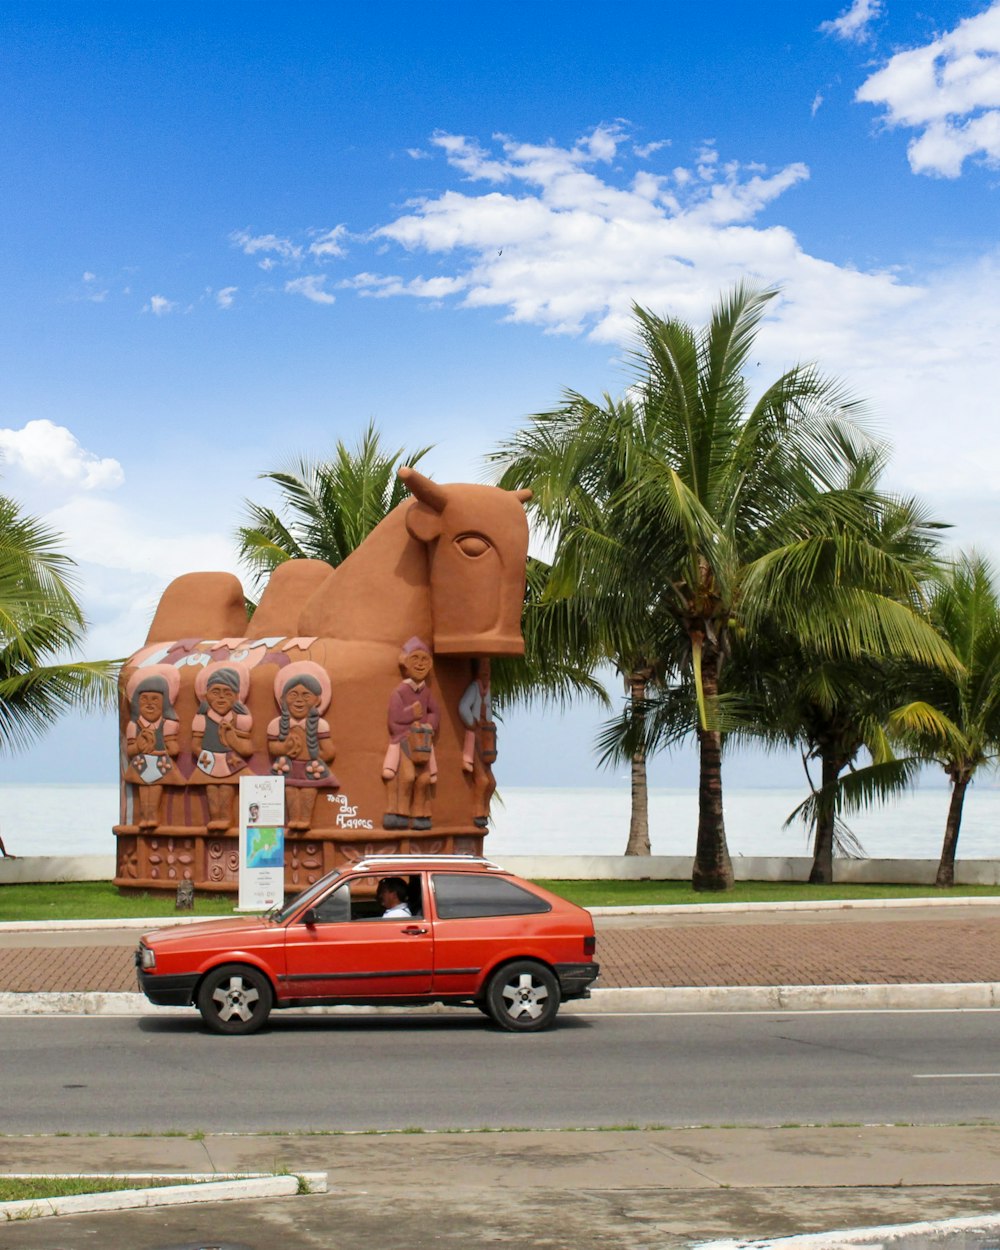 a red car driving past a large sculpture of elephants